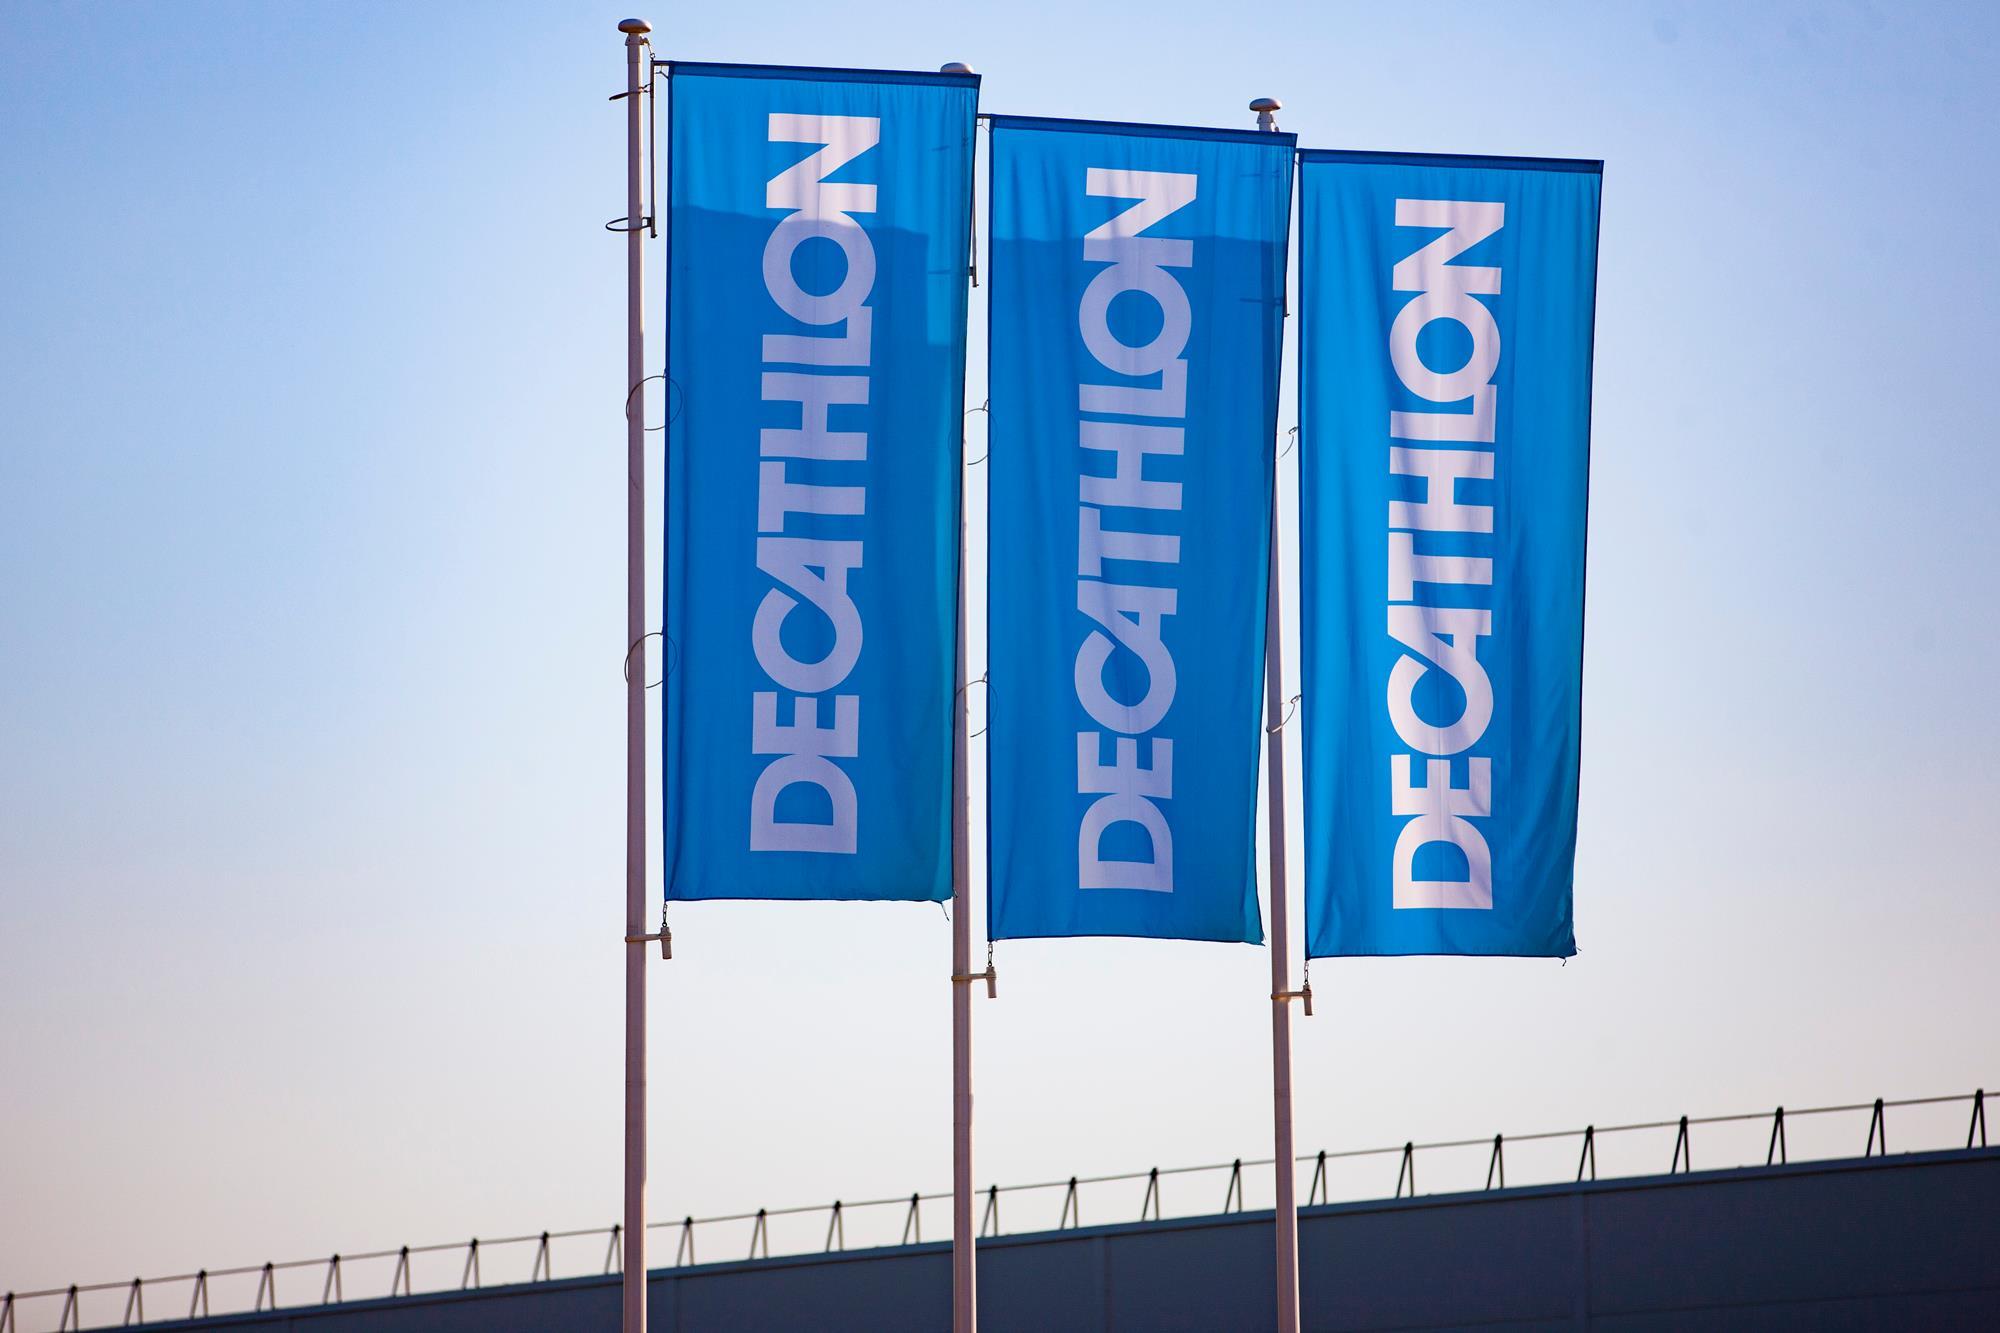 Why is Decathlon the people's champion 